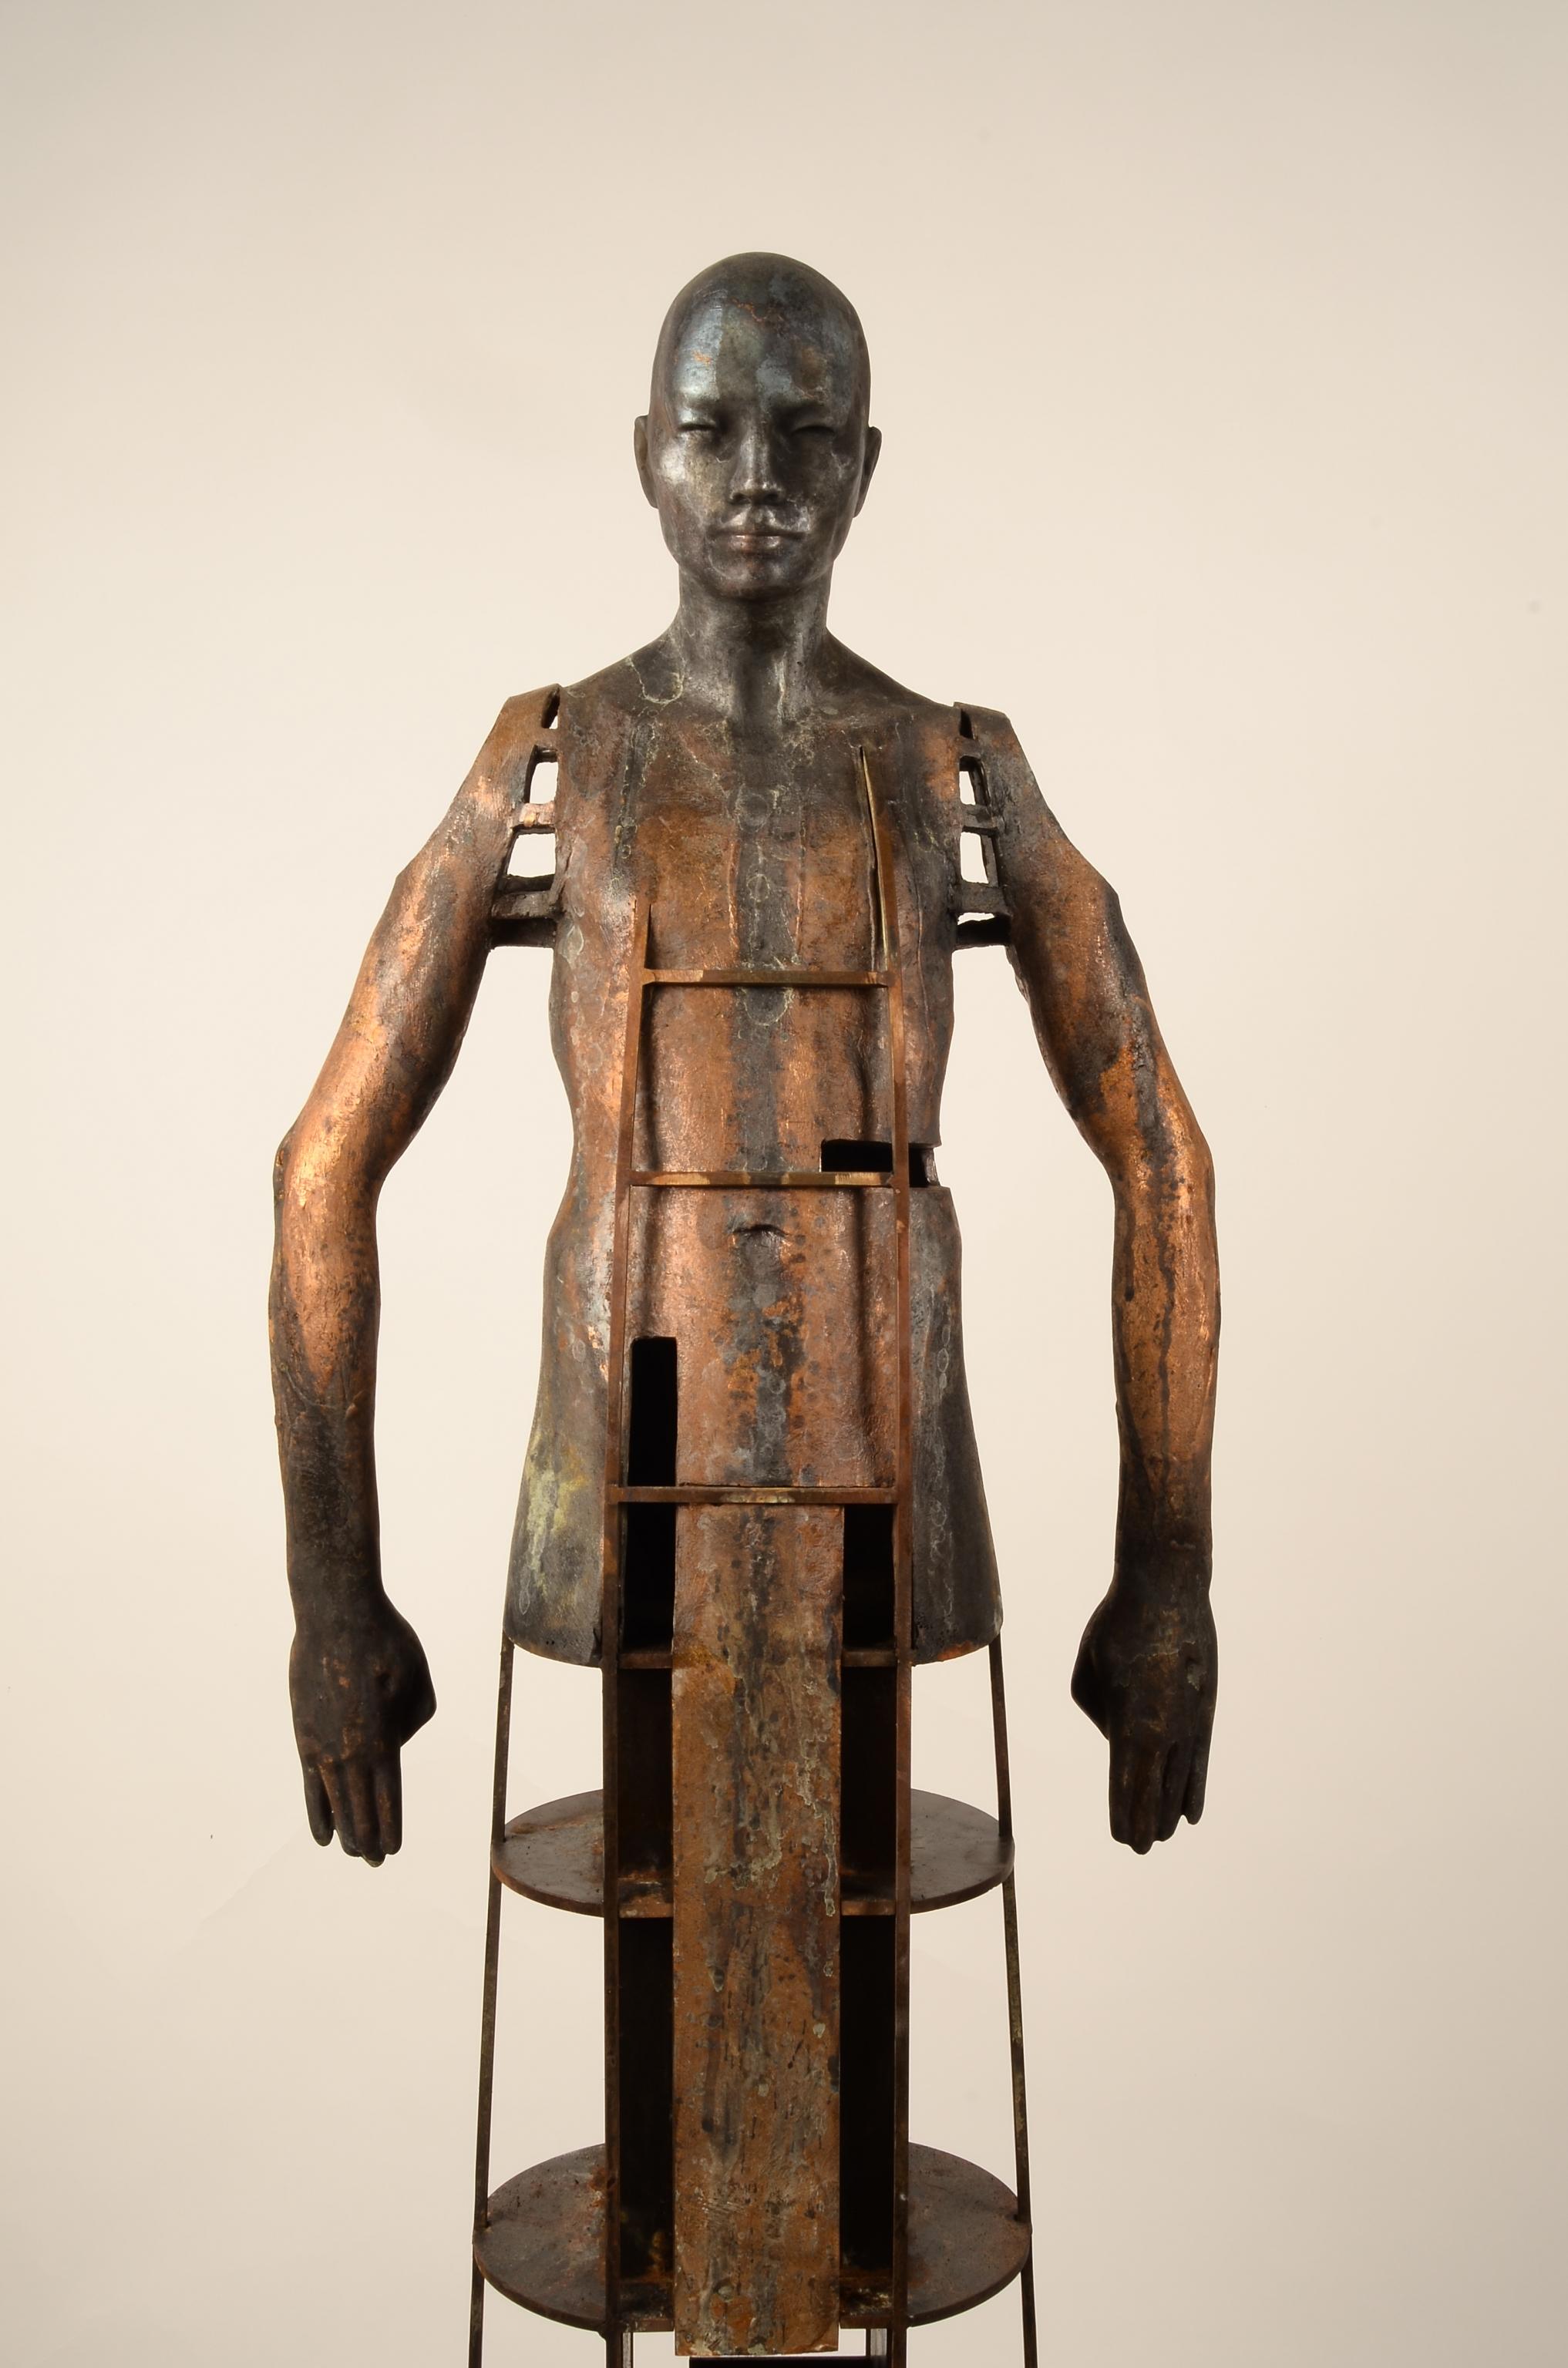 Construction II - Bronze Sculpture Surreal Transfiguring Human Form, Lush Patina - Gold Abstract Sculpture by Jesus Curia Perez